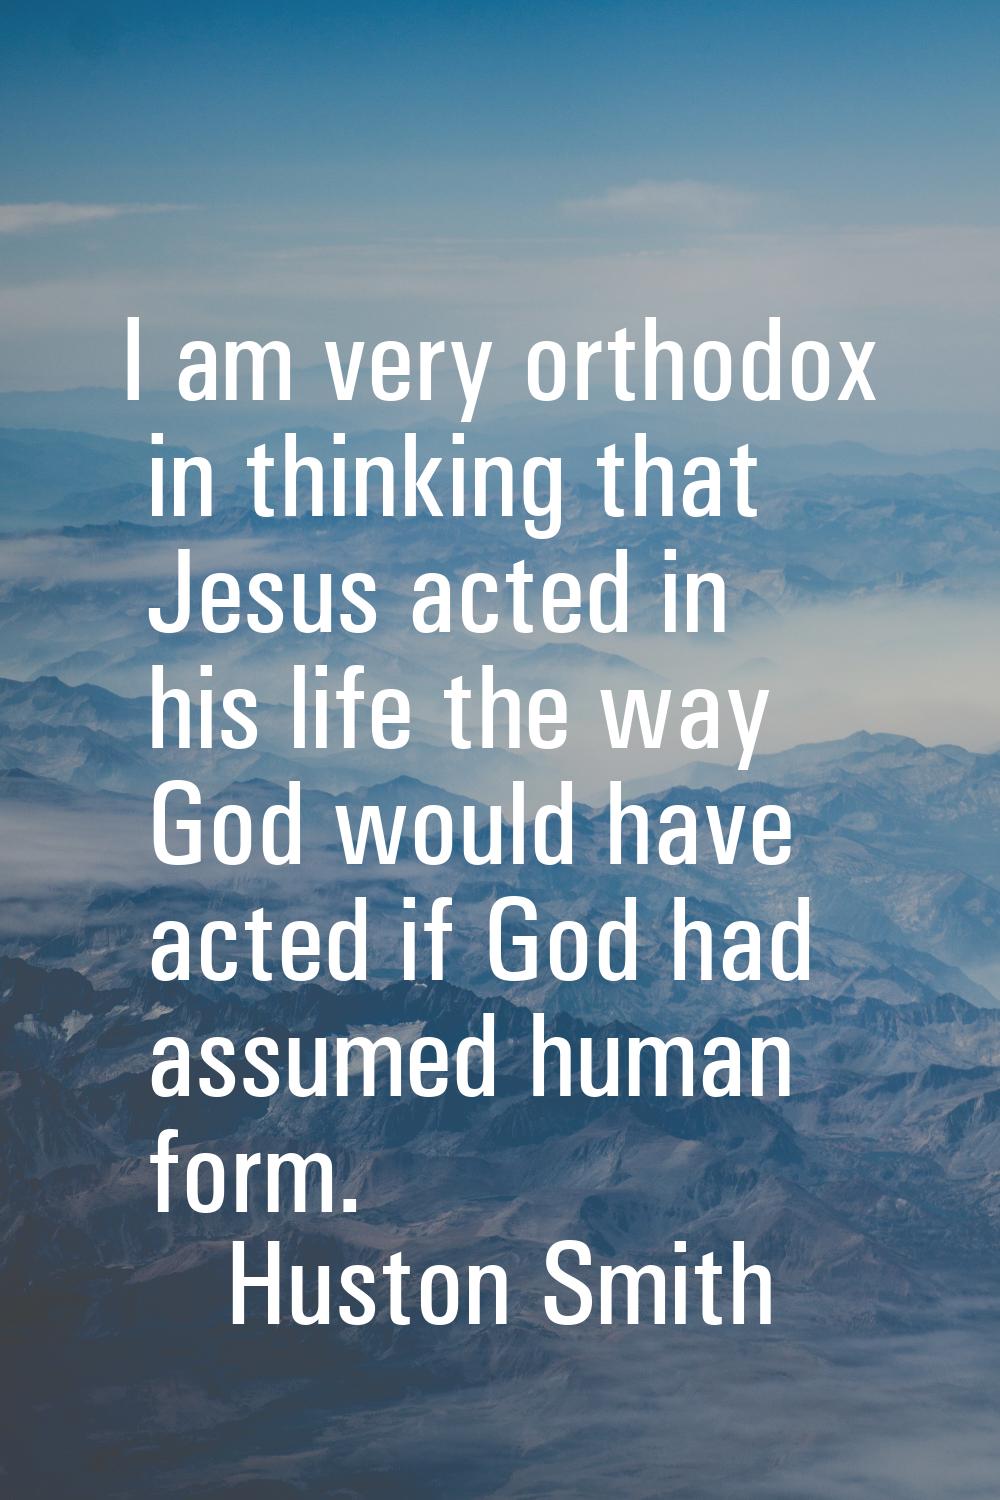 I am very orthodox in thinking that Jesus acted in his life the way God would have acted if God had